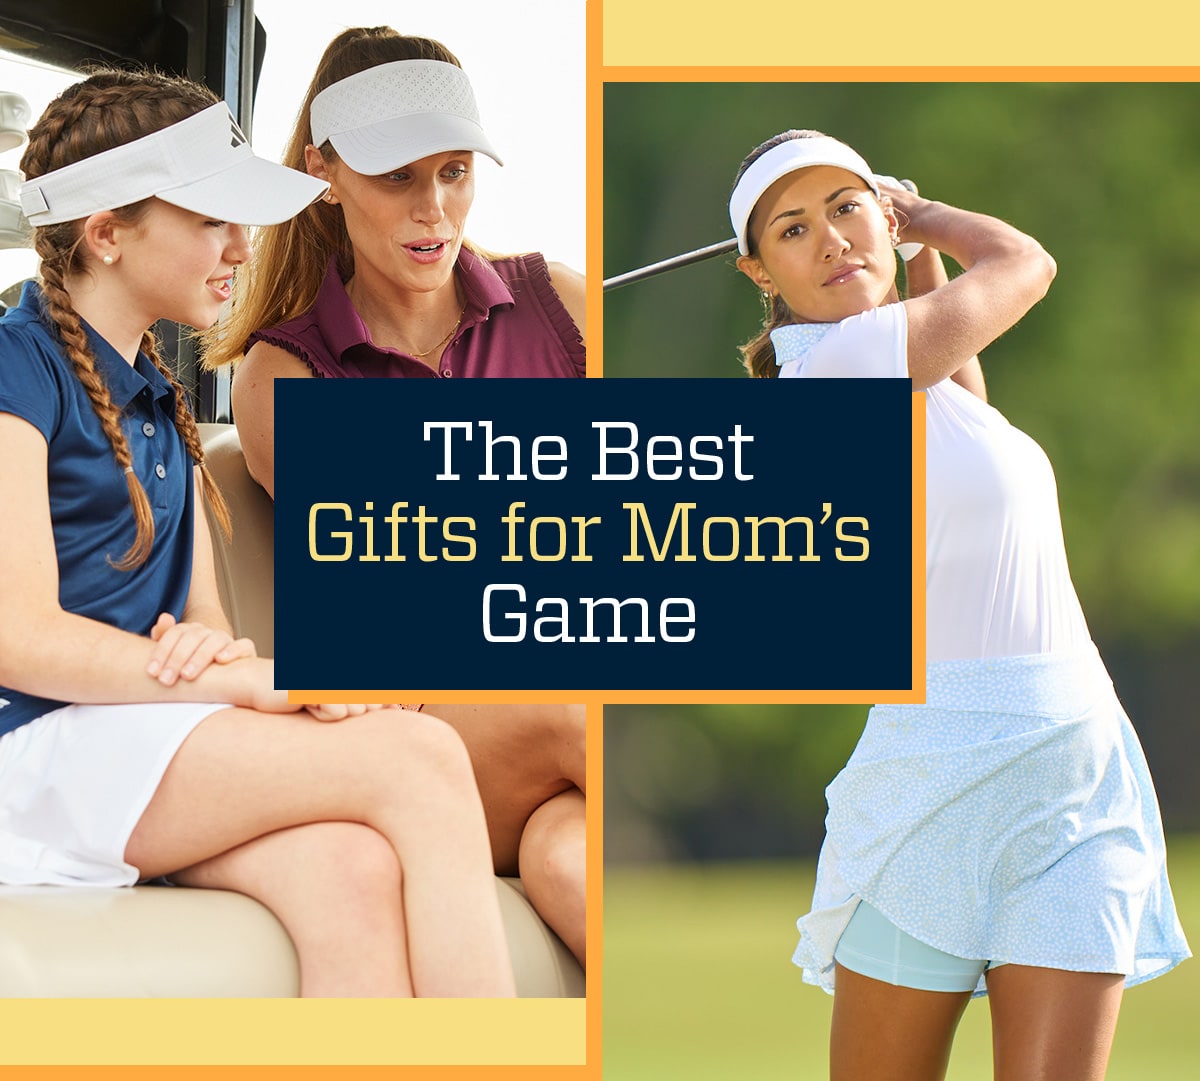 The best gifts for Mom's game.